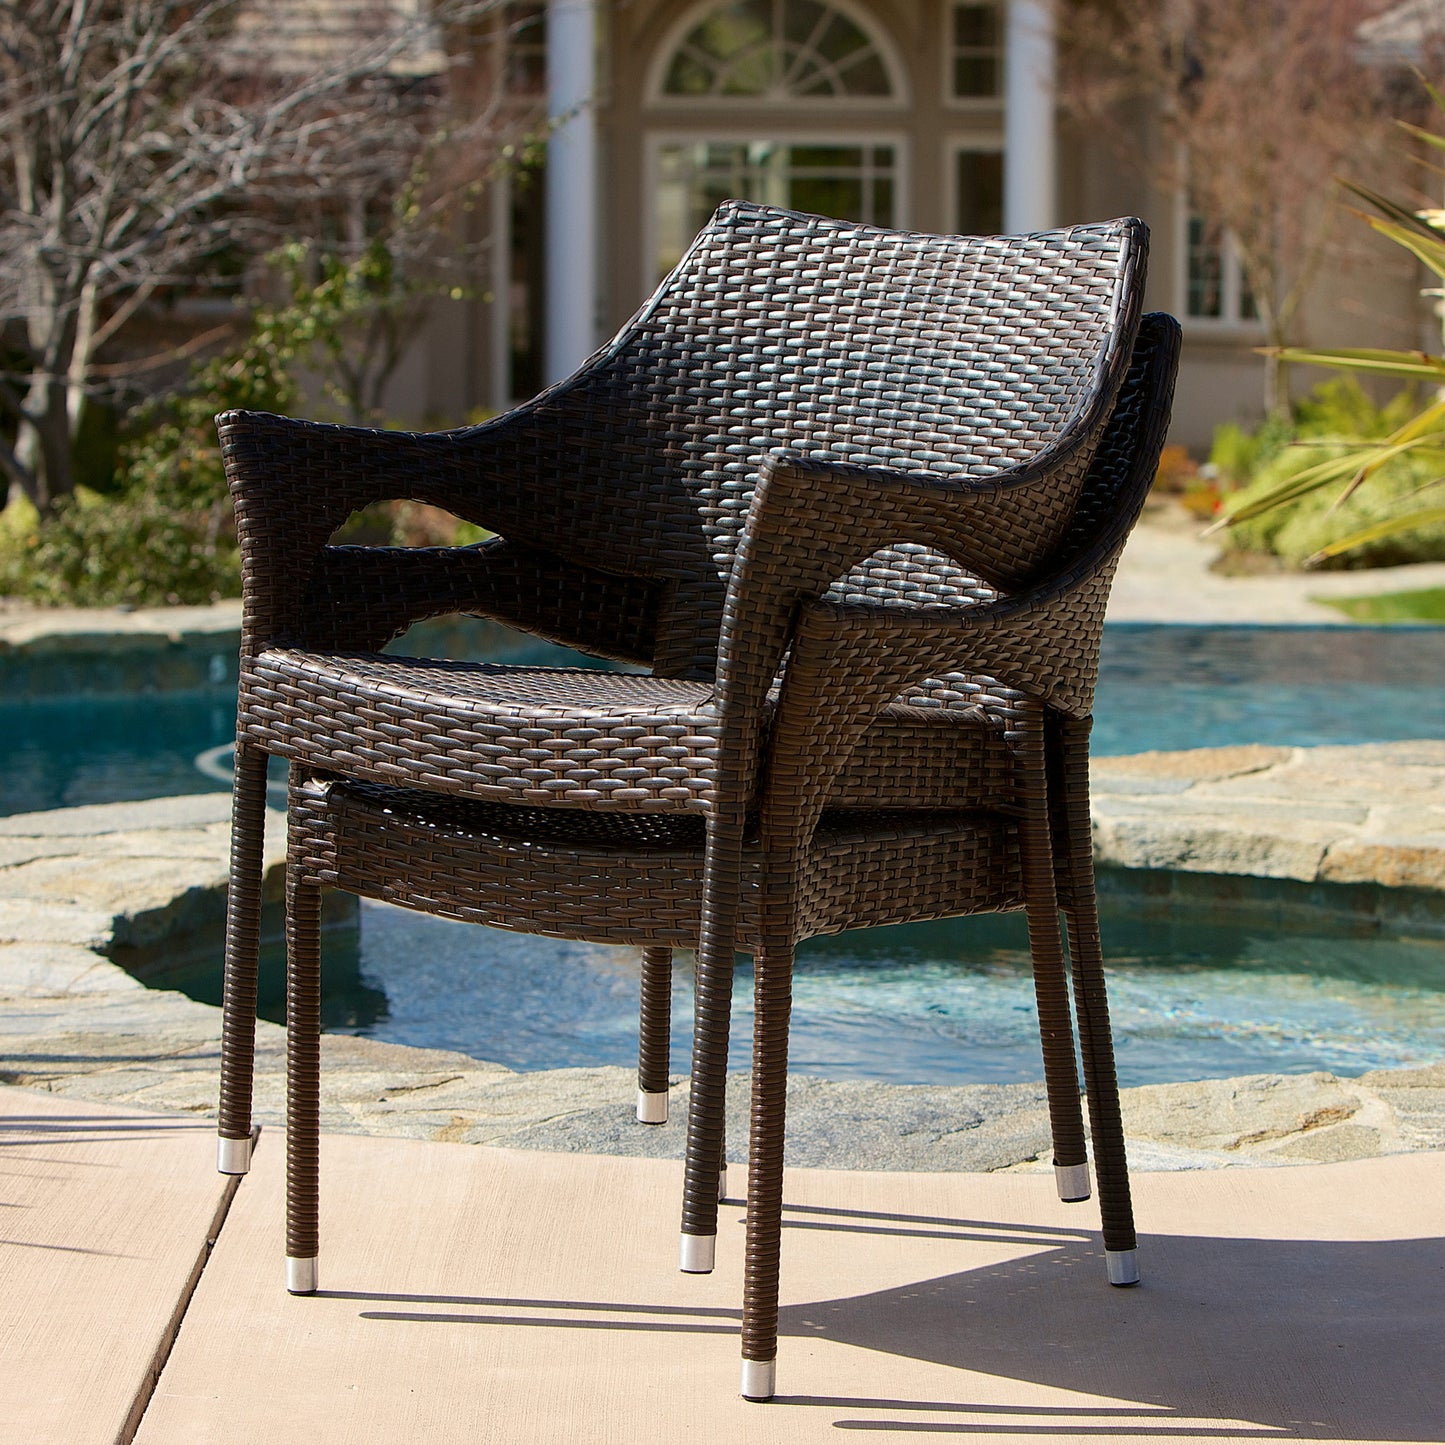 Tahitian Outdoor 3 Piece Multi-Brown Wicker Chat Set with Stacking Chairs